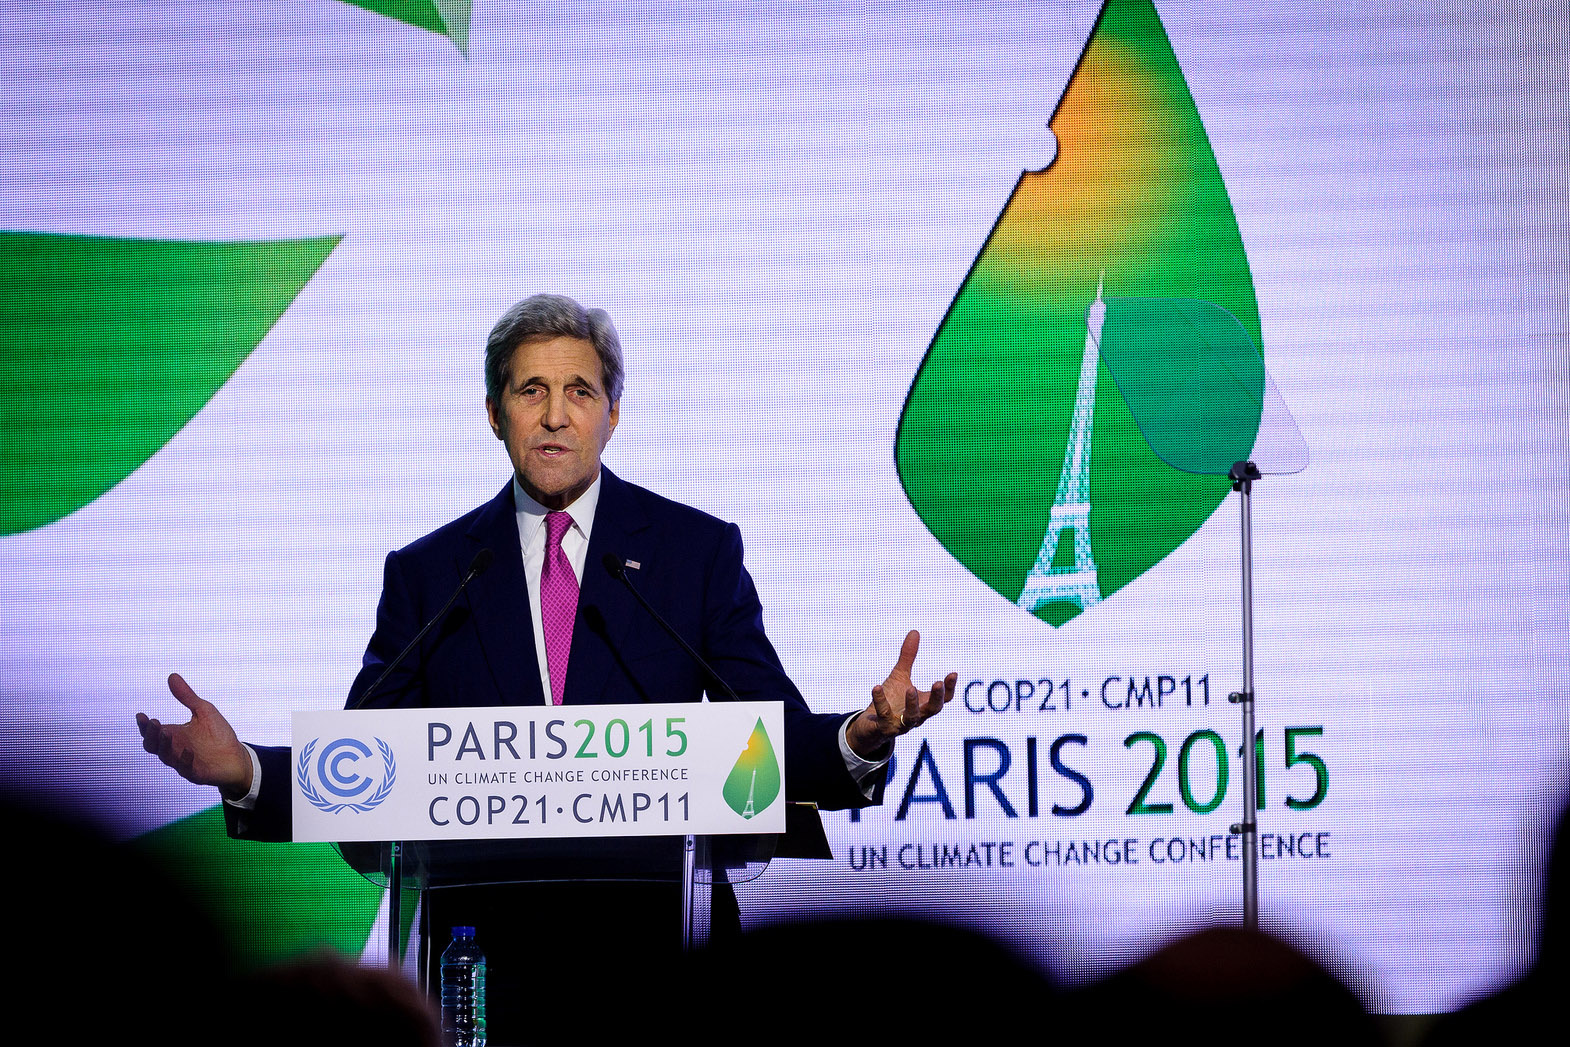 U.S. Secretary of State John Kerry gives his closing remarks at the 'COP21' UN climate summit. Photo: Arnaud Bouissou / COP21